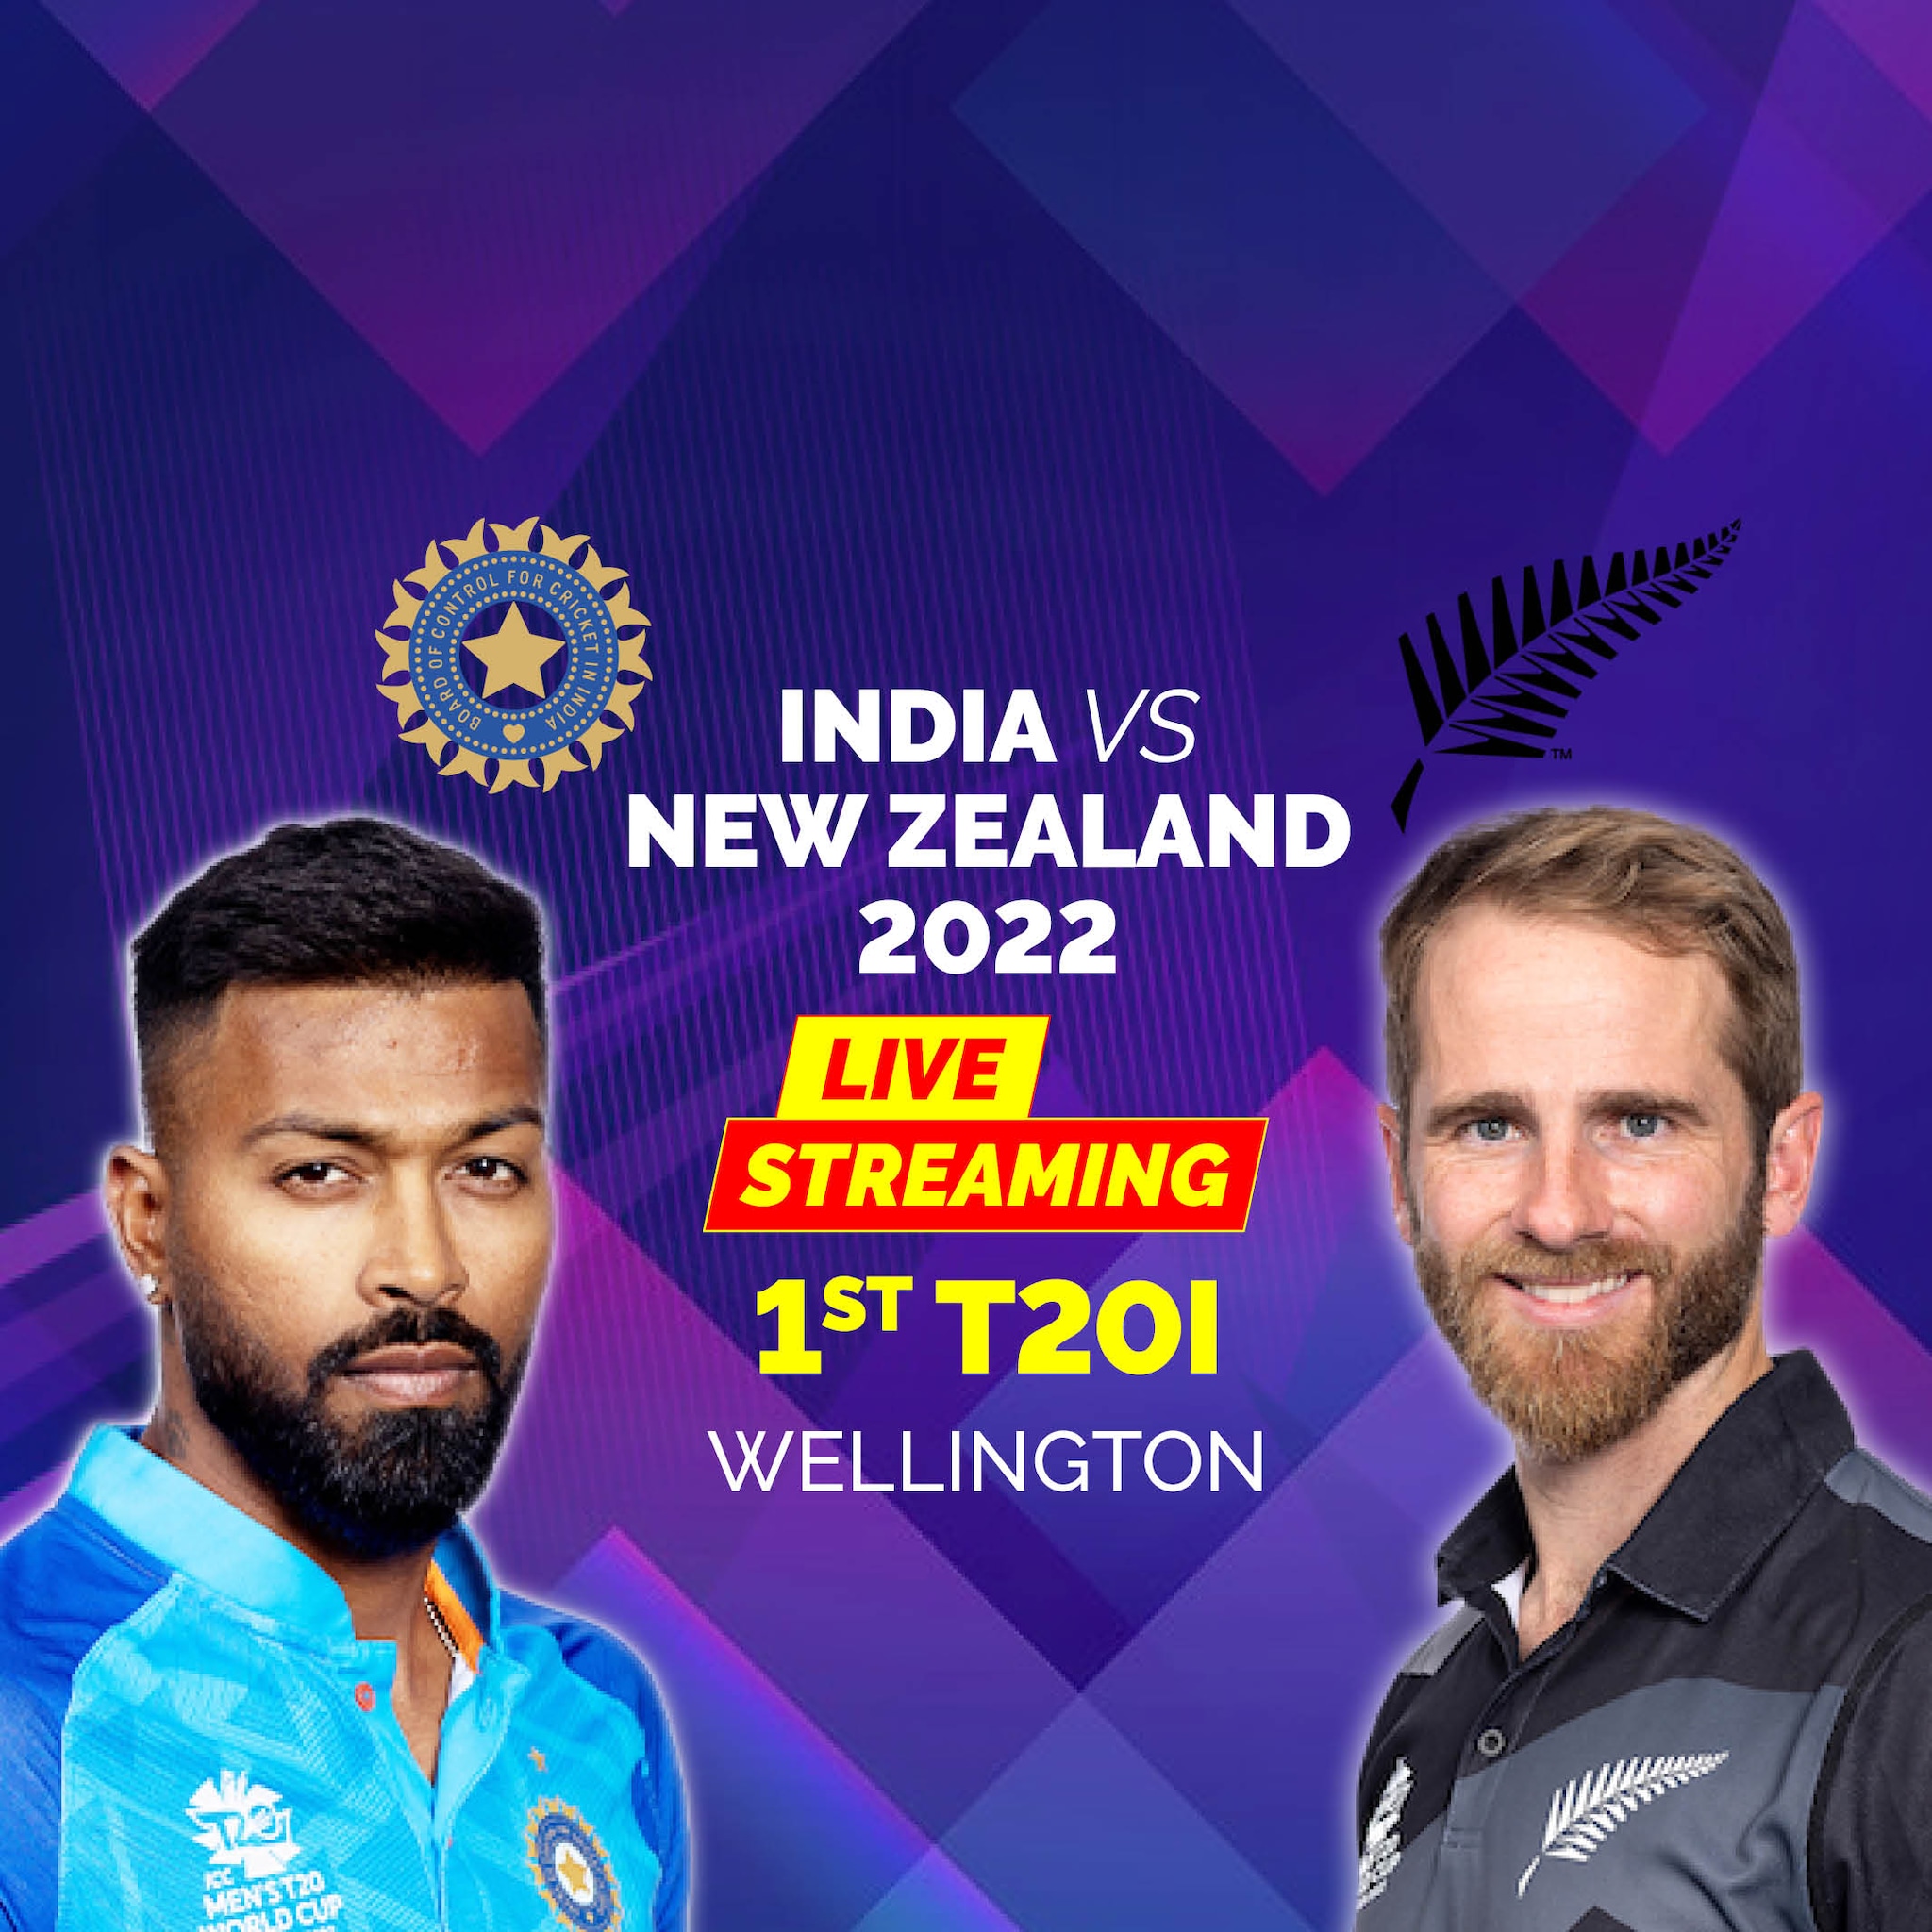 India vs New Zealand Live Streaming How to Watch IND vs NZ 2022, 1st T20I Coverage on TV And Online